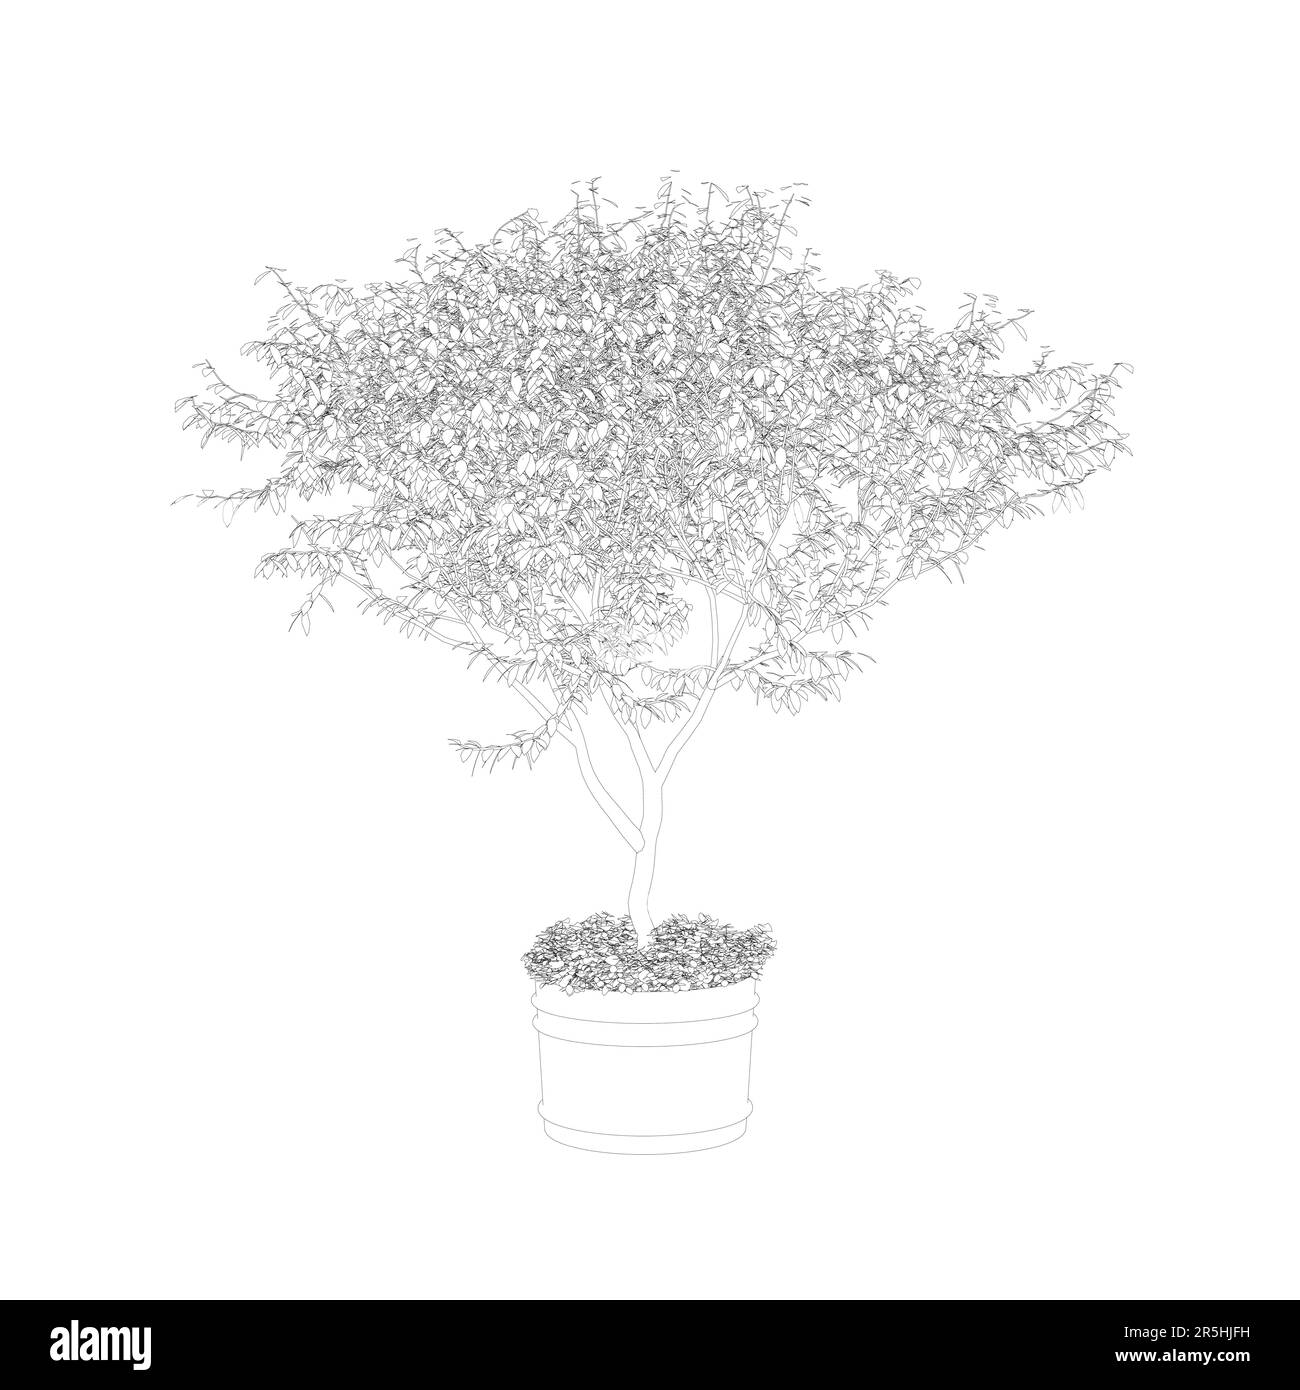 Outline of a small decorative tree in a pot from black lines isolated on a white background. Vector illustration. Stock Vector